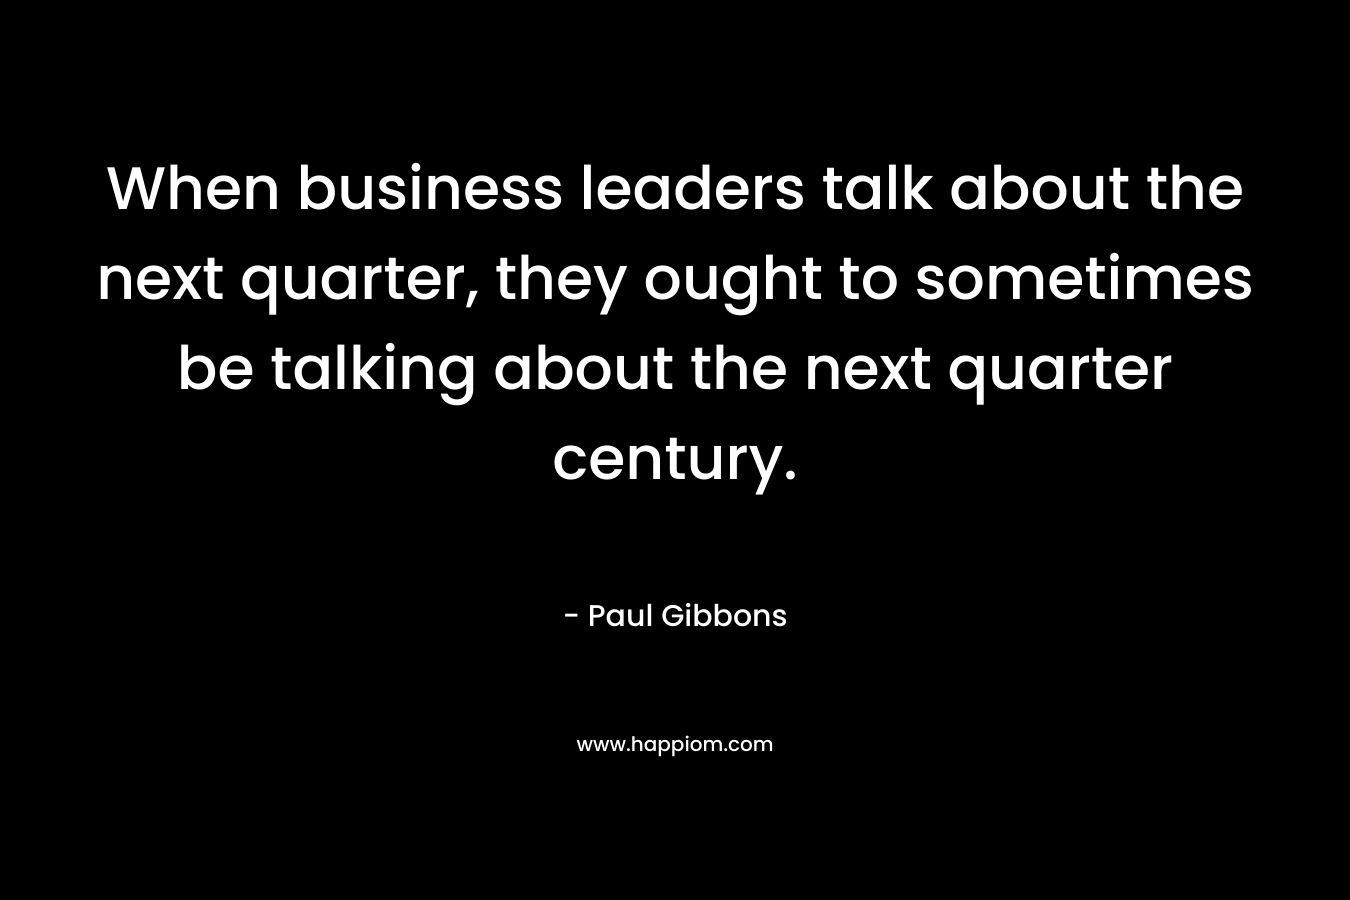 When business leaders talk about the next quarter, they ought to sometimes be talking about the next quarter century. – Paul Gibbons